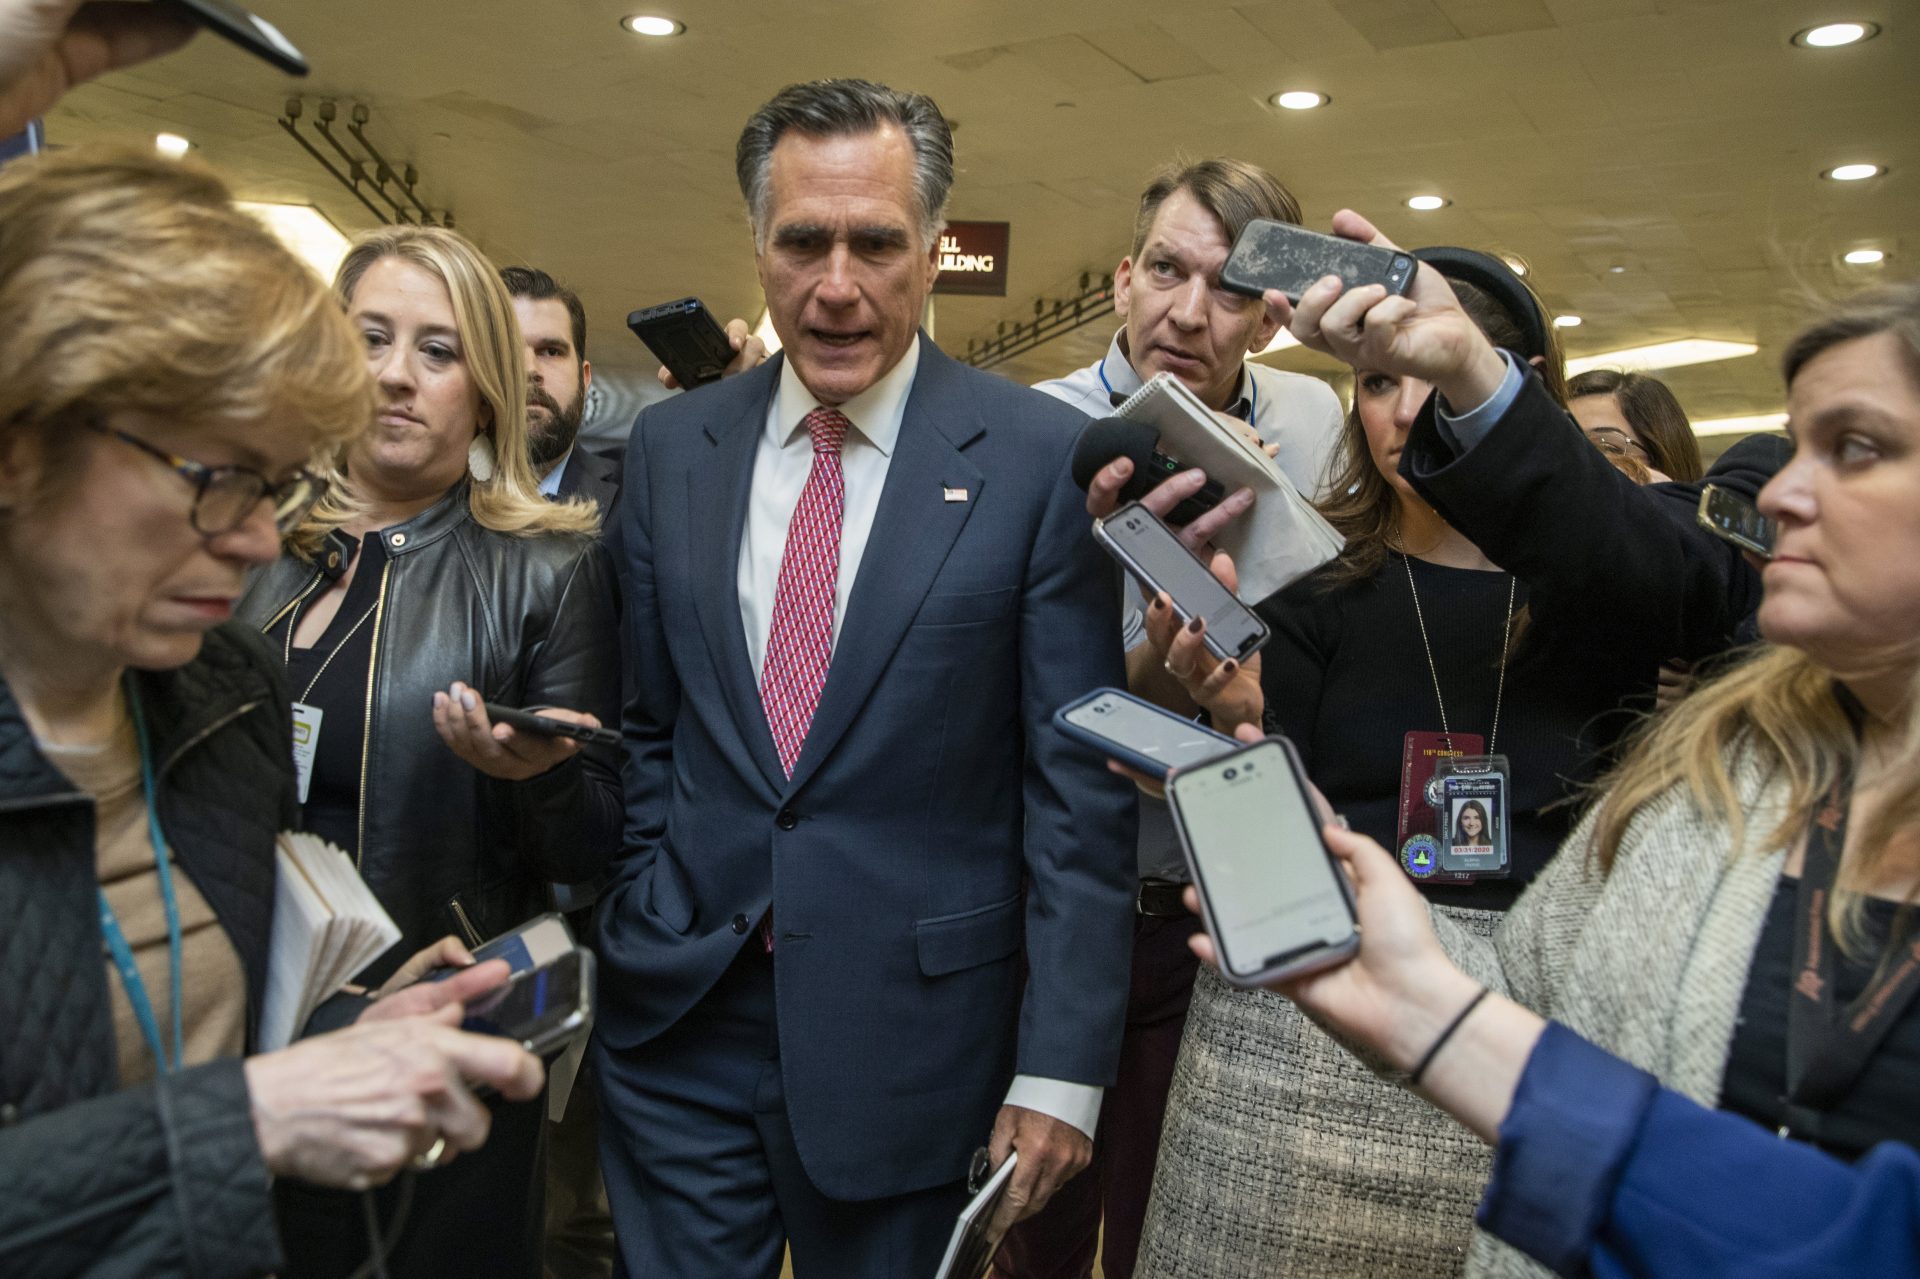 Sen. Mitt Romney, R-Utah, speaks to reporters as he arrives at the Capitol in Washington, Monday, Jan. 27, 2020, during the impeachment trial of President Donald Trump on charges of abuse of power and obstruction of Congress.